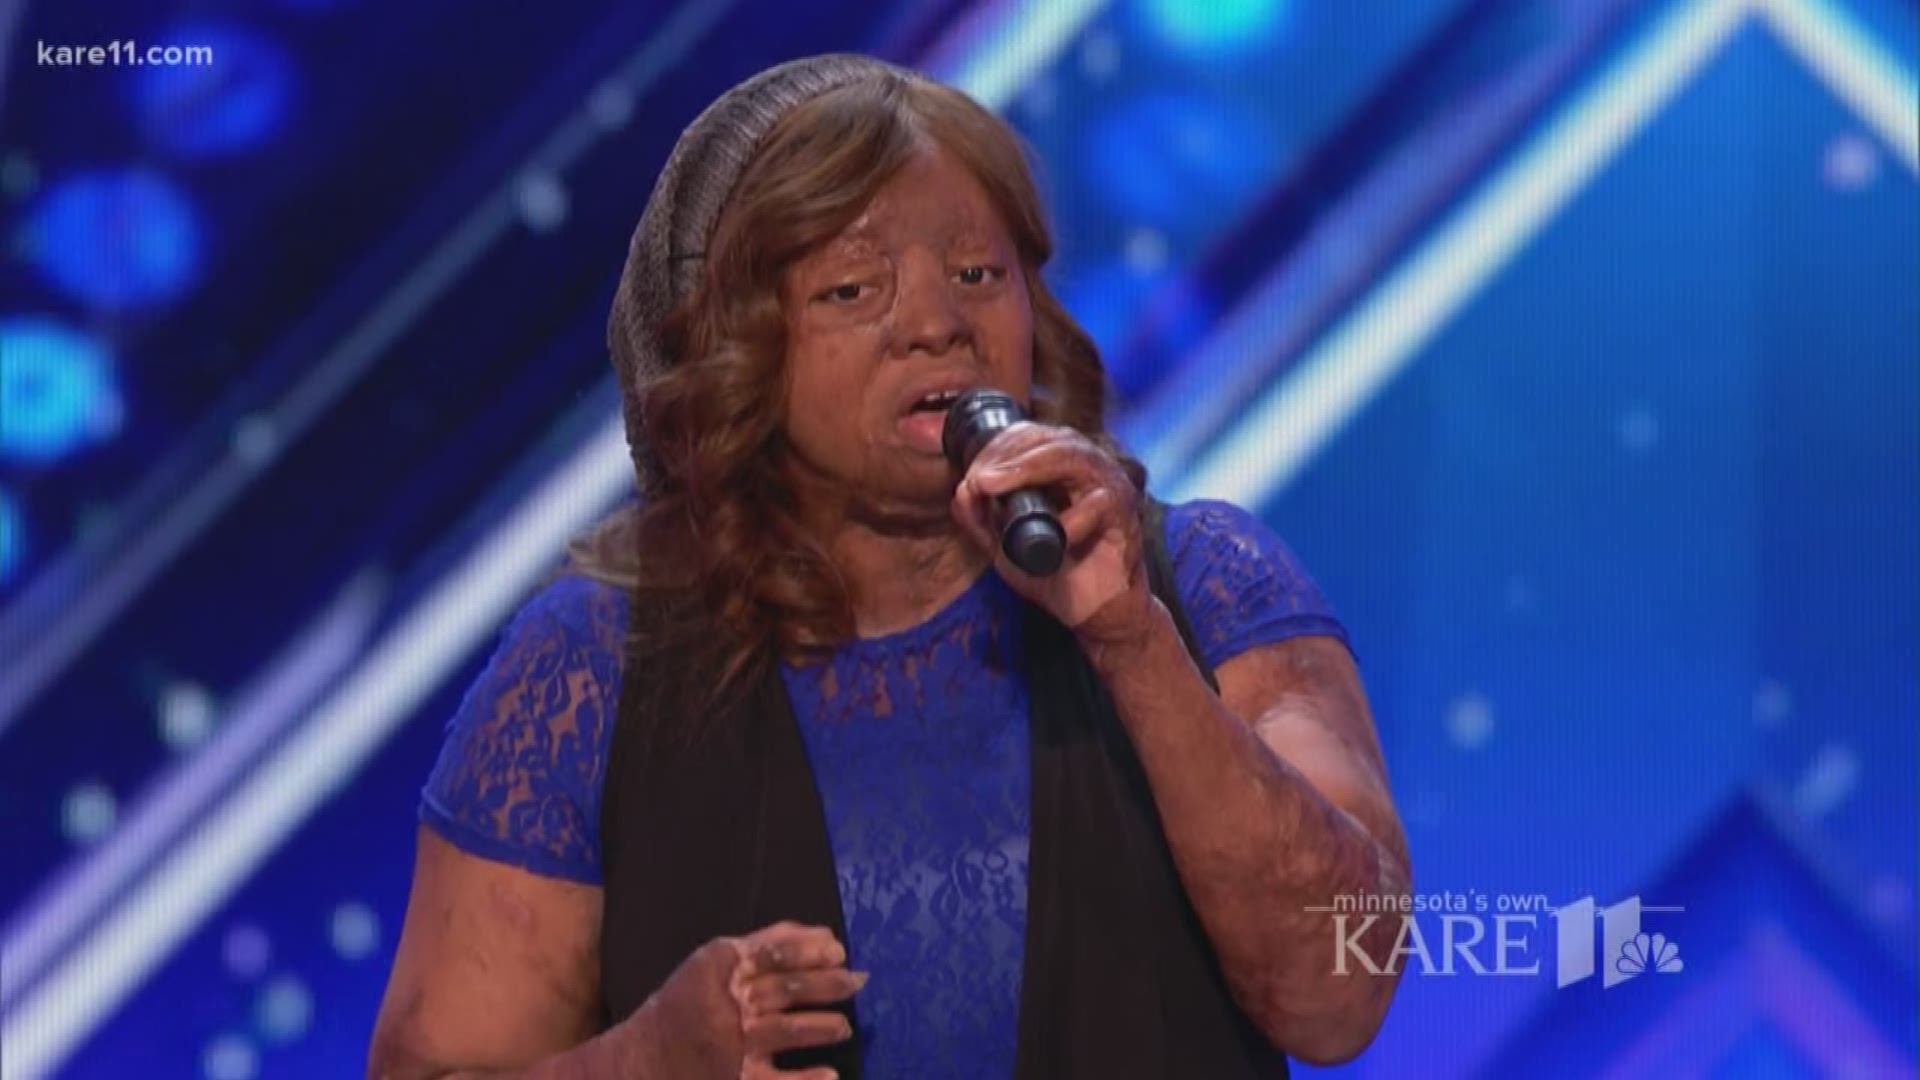 Kechi Okwuchi had every reason to become jaded and bitter after a plane crash left the Nigeria native severely burned. Instead, she turned to music, and made her recovery an inspiration to others.